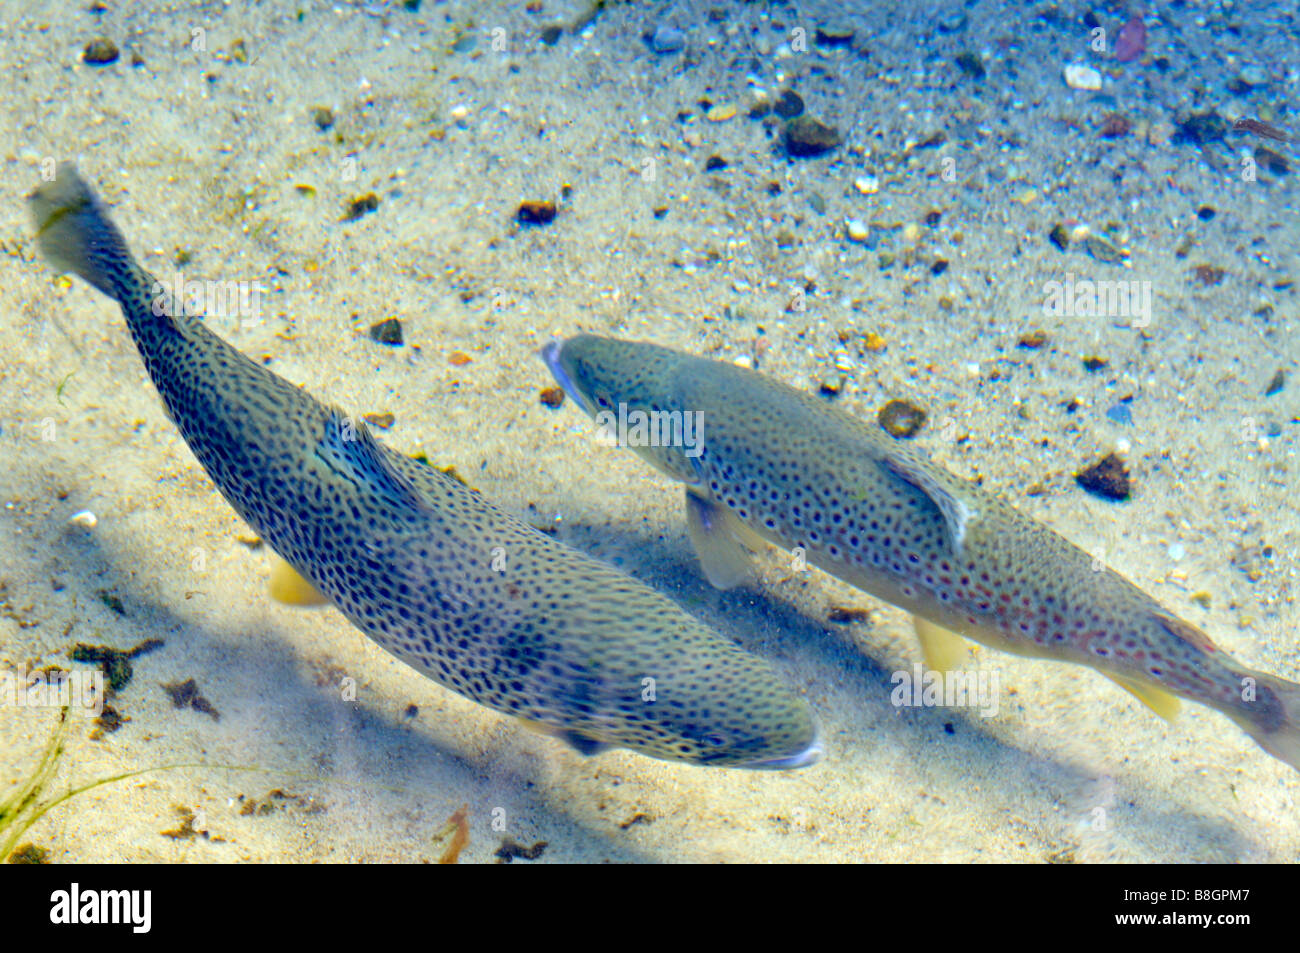 2 two 'brown trout'  'Salmo trutta' swimming in fresh water over a sandy bottom Stock Photo